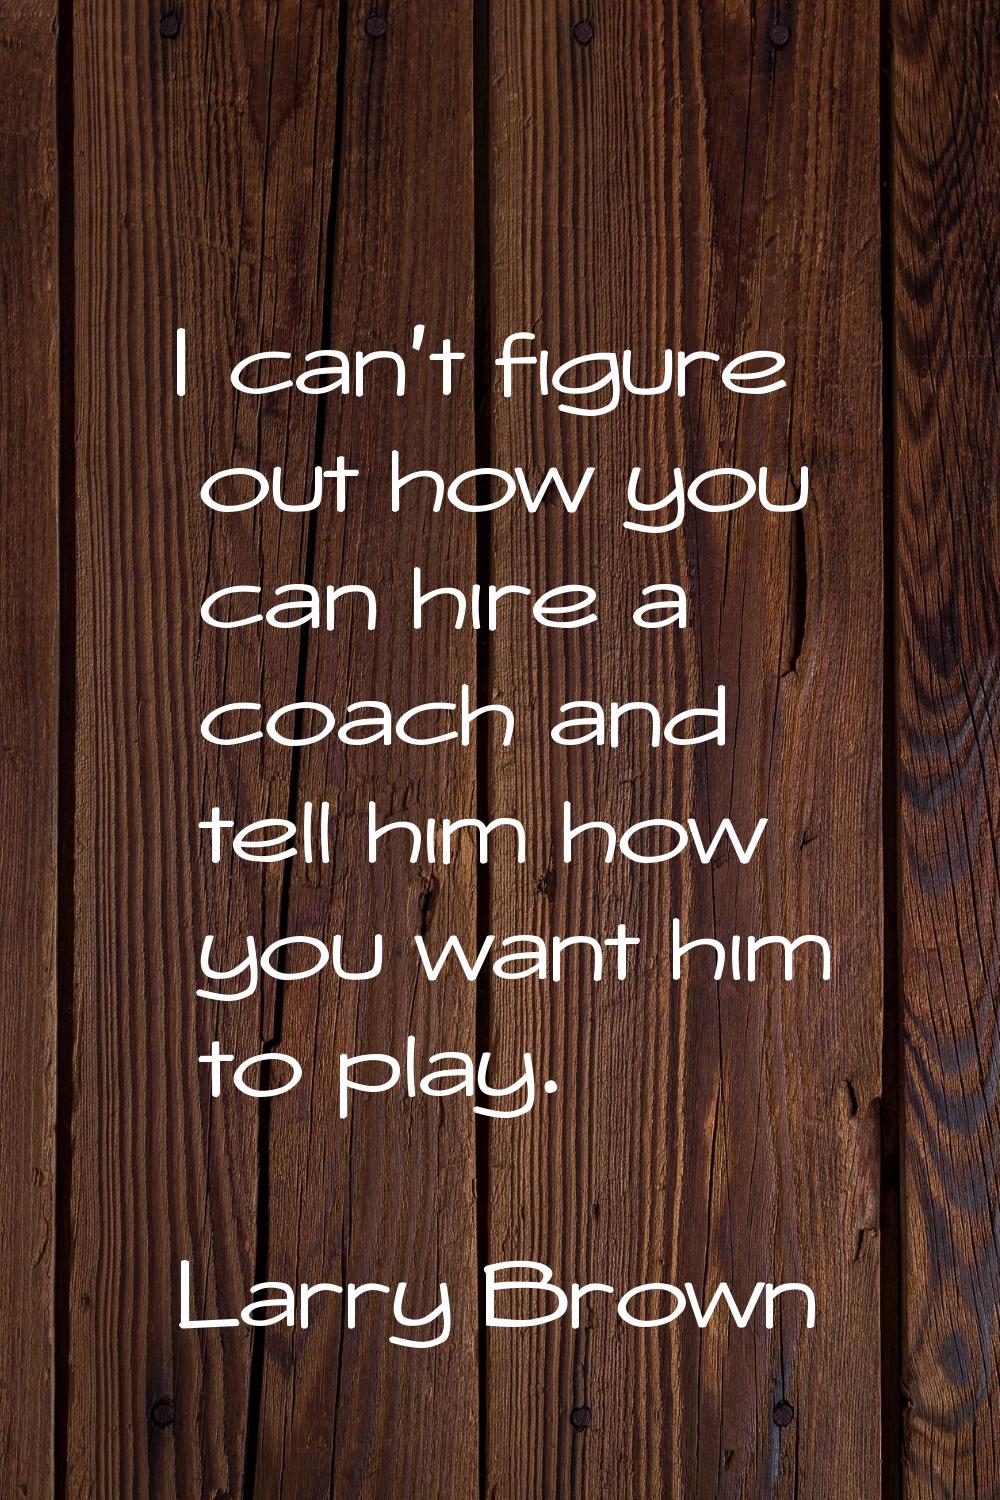 I can't figure out how you can hire a coach and tell him how you want him to play.